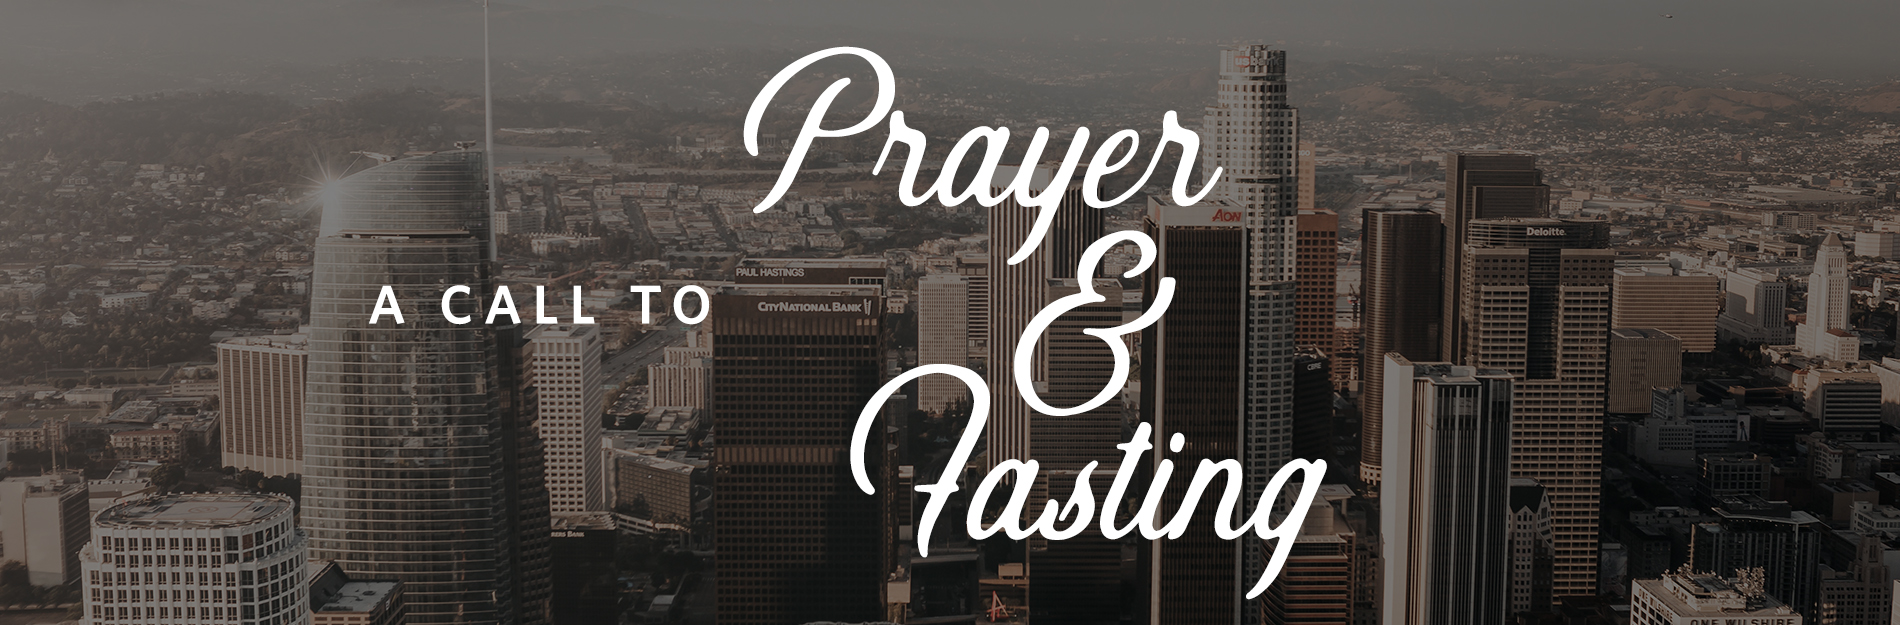 A Call to Prayer & Fasting - 2020 2